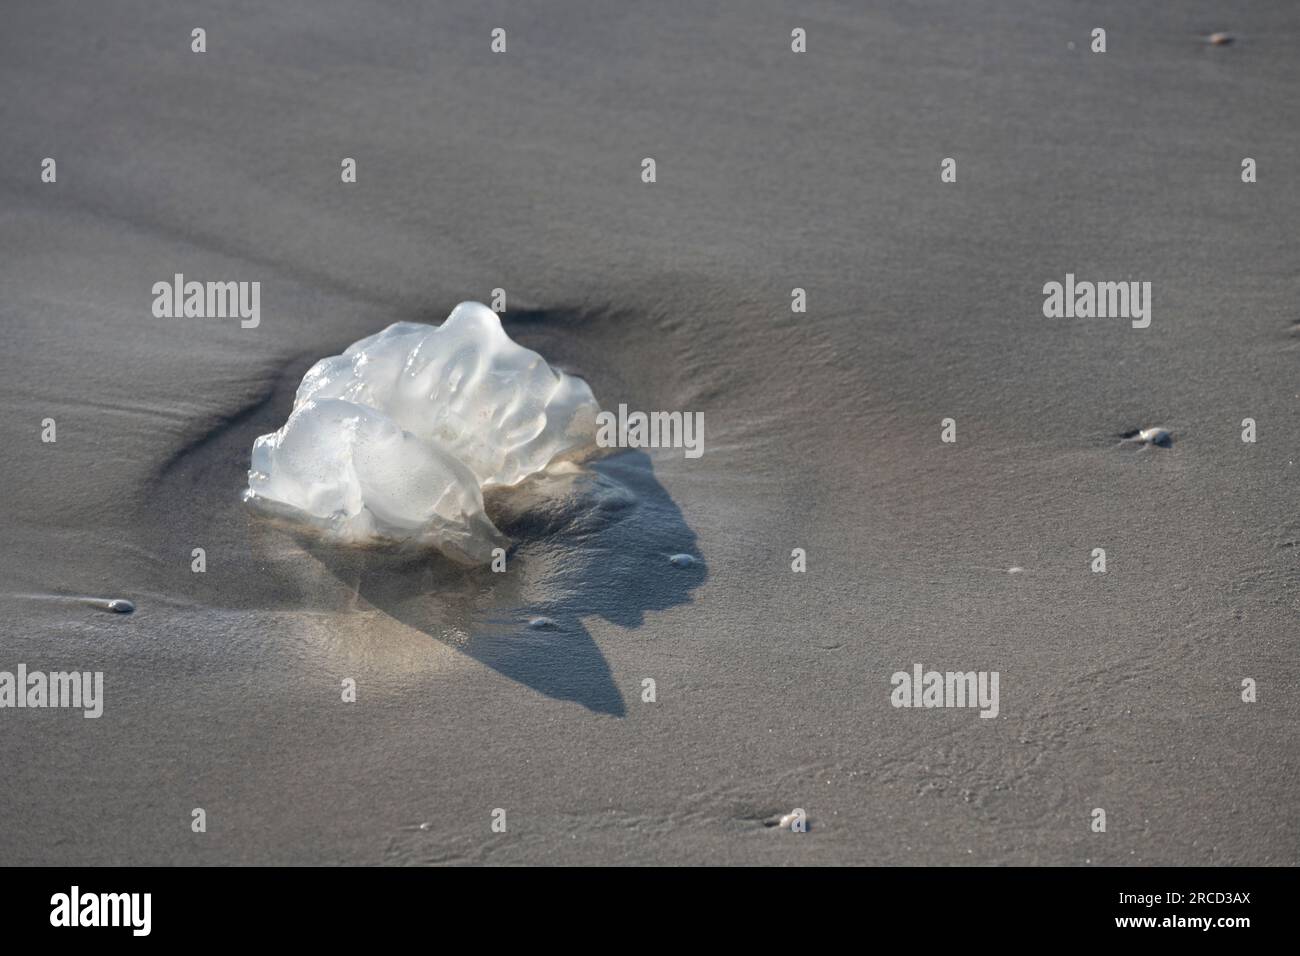 Jellyfish washed onto the beach. Photographed on the Mediterranean Sea at Maagan Michael, Israel Stock Photo